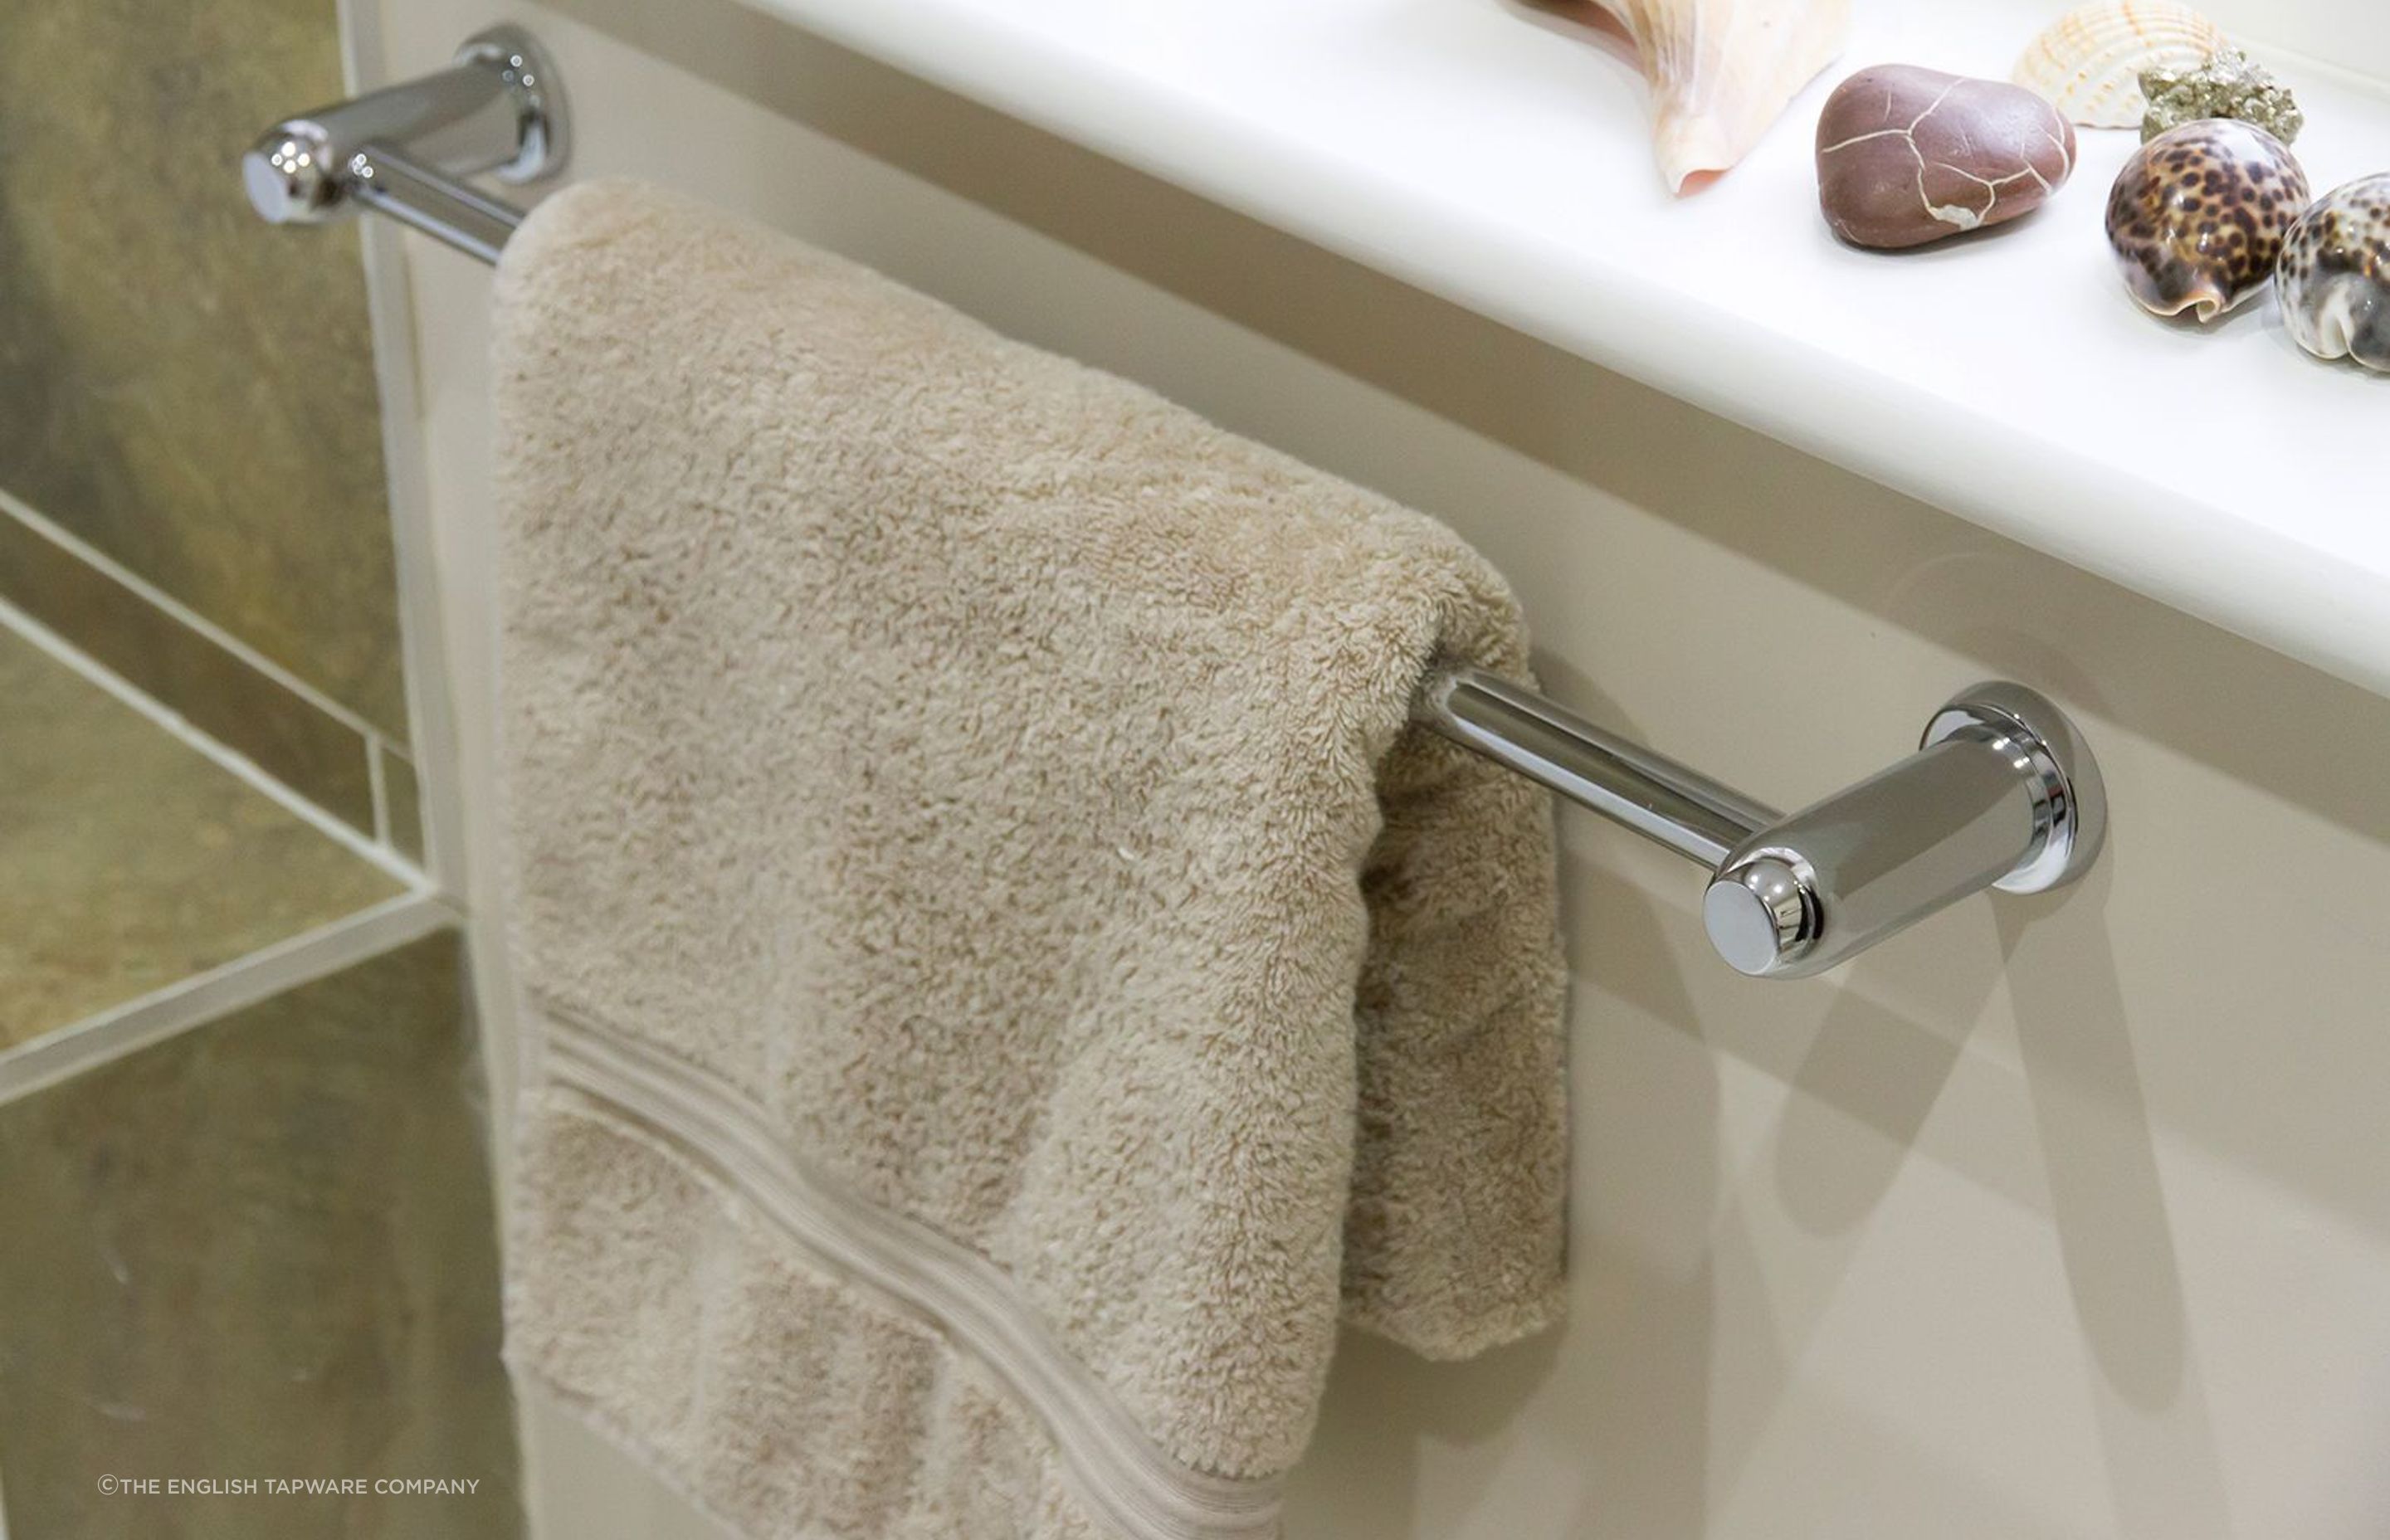 A traditional towel supported by a Perrin &amp; Rowe Contemporary Towel Rail from The English Tapware Company